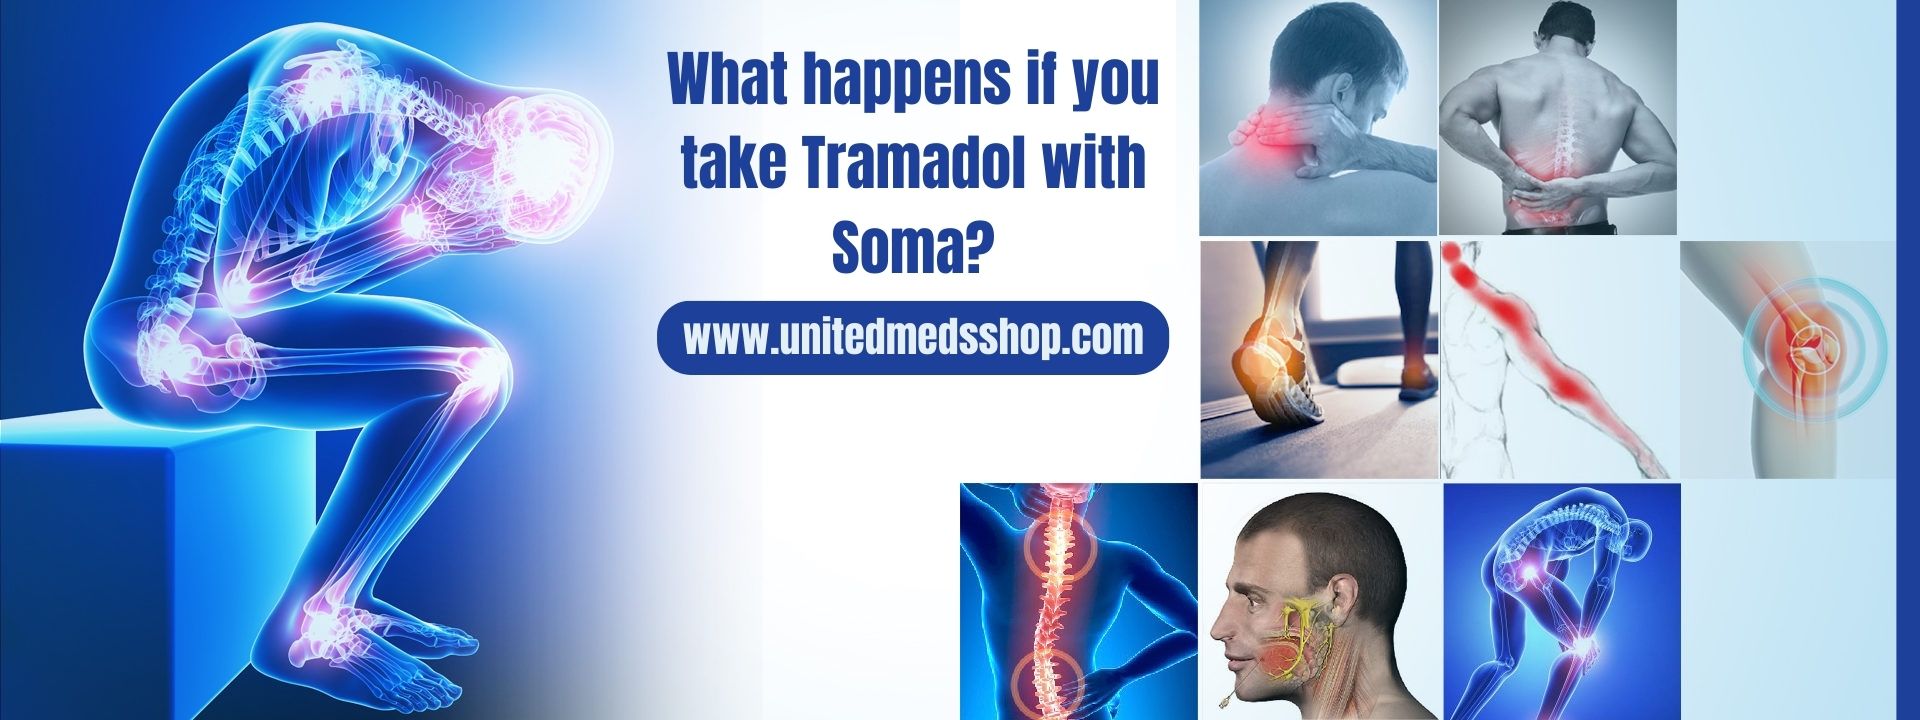 What happens if you take Tramadol with Soma?